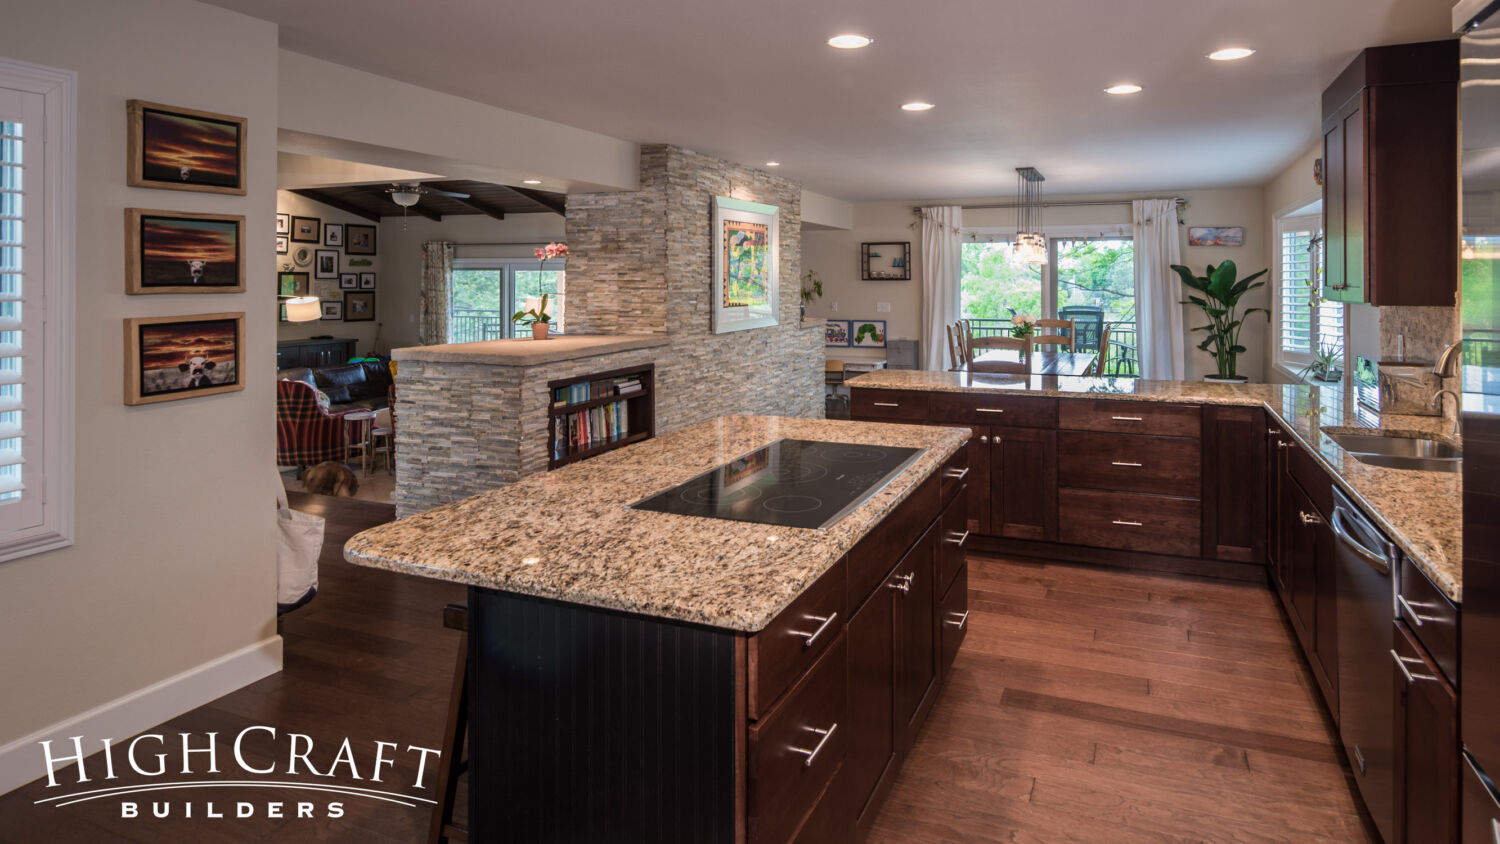 Outdoor-Living-And-Interior-Remodel-Warm-Kitchen-Cabinets-Granite-Countertops